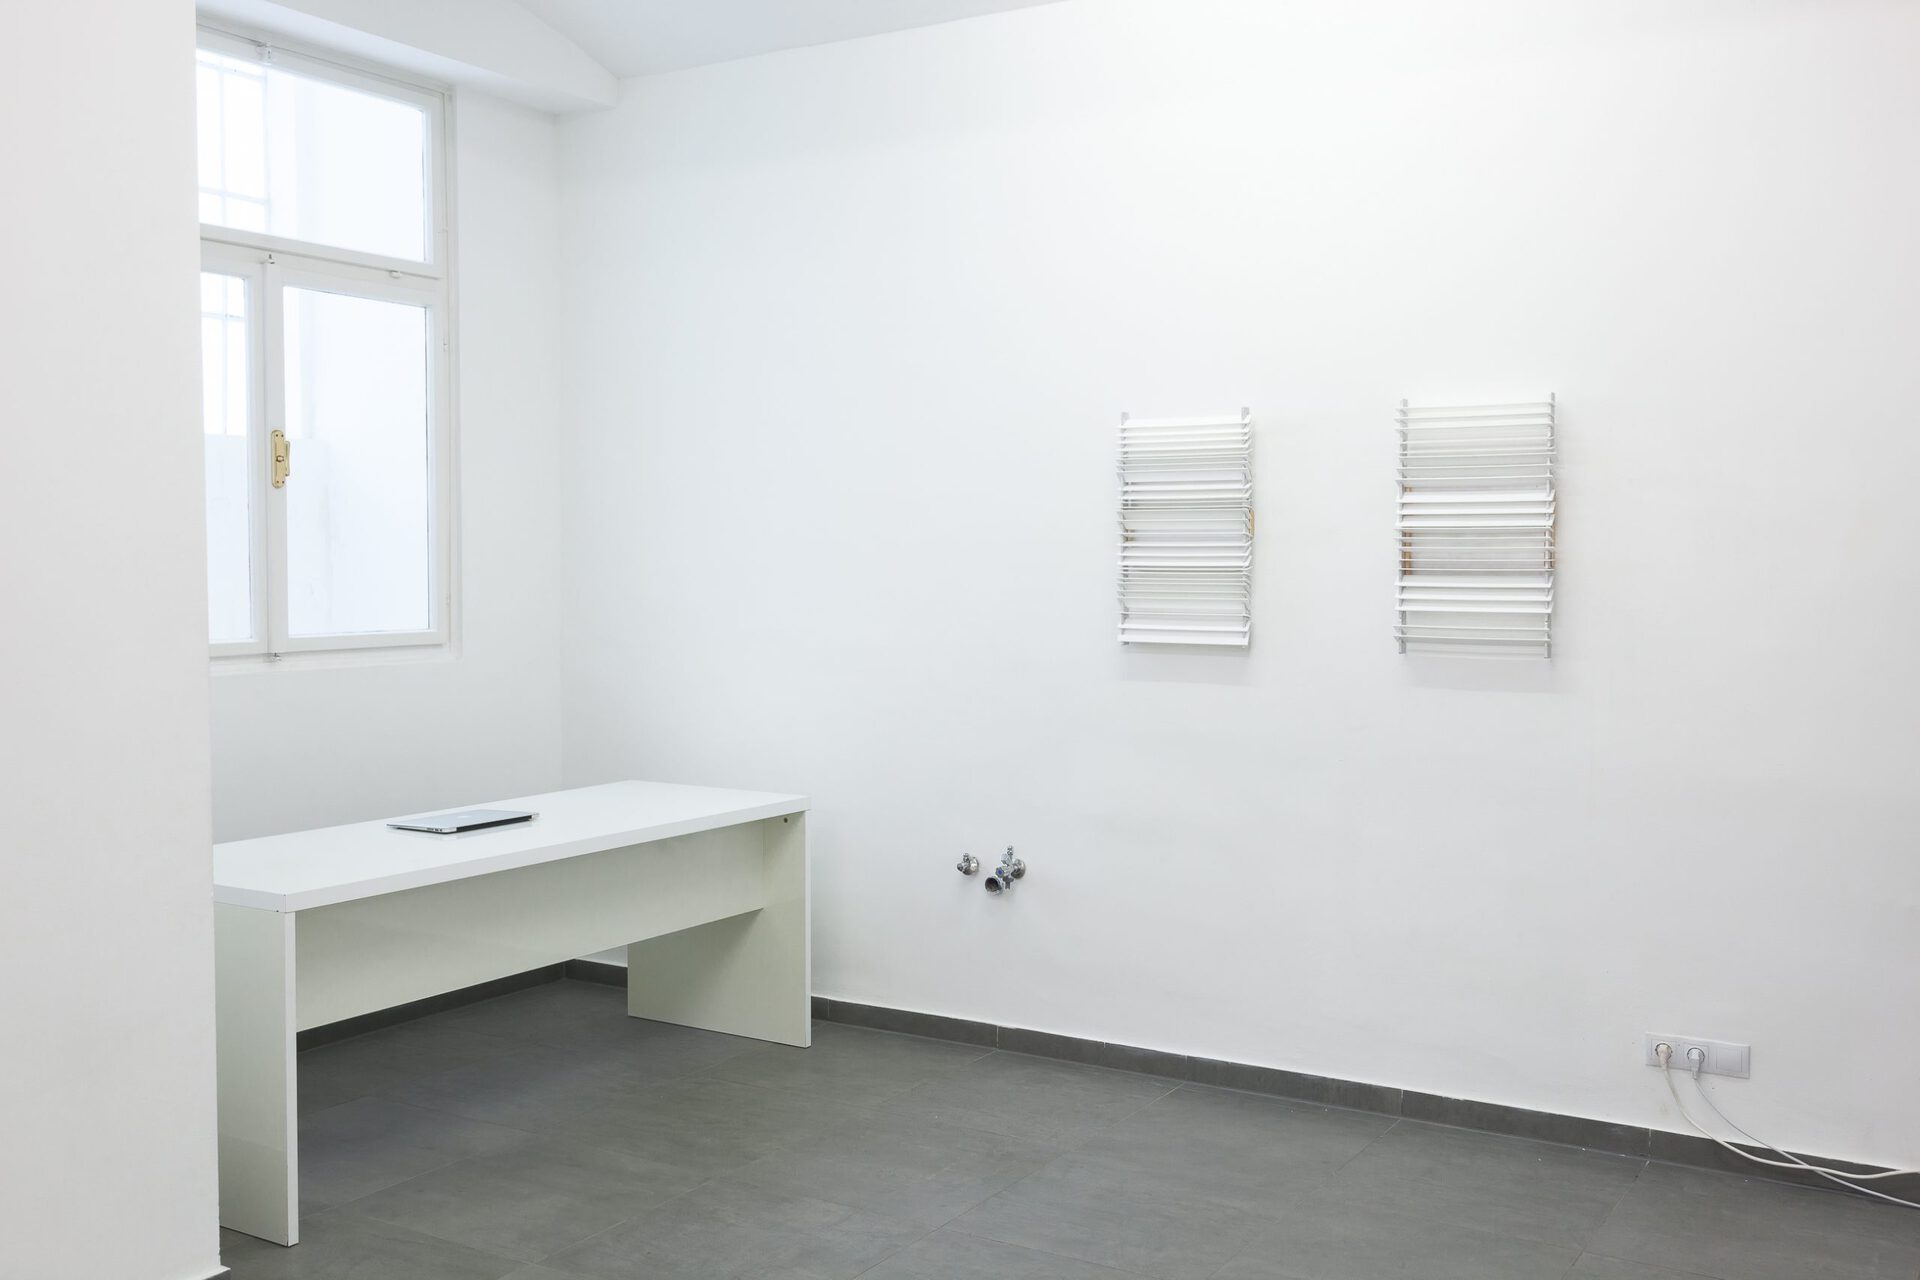 Installation view: Elizabeth Orr, The Over There, VIN VIN, 2021.